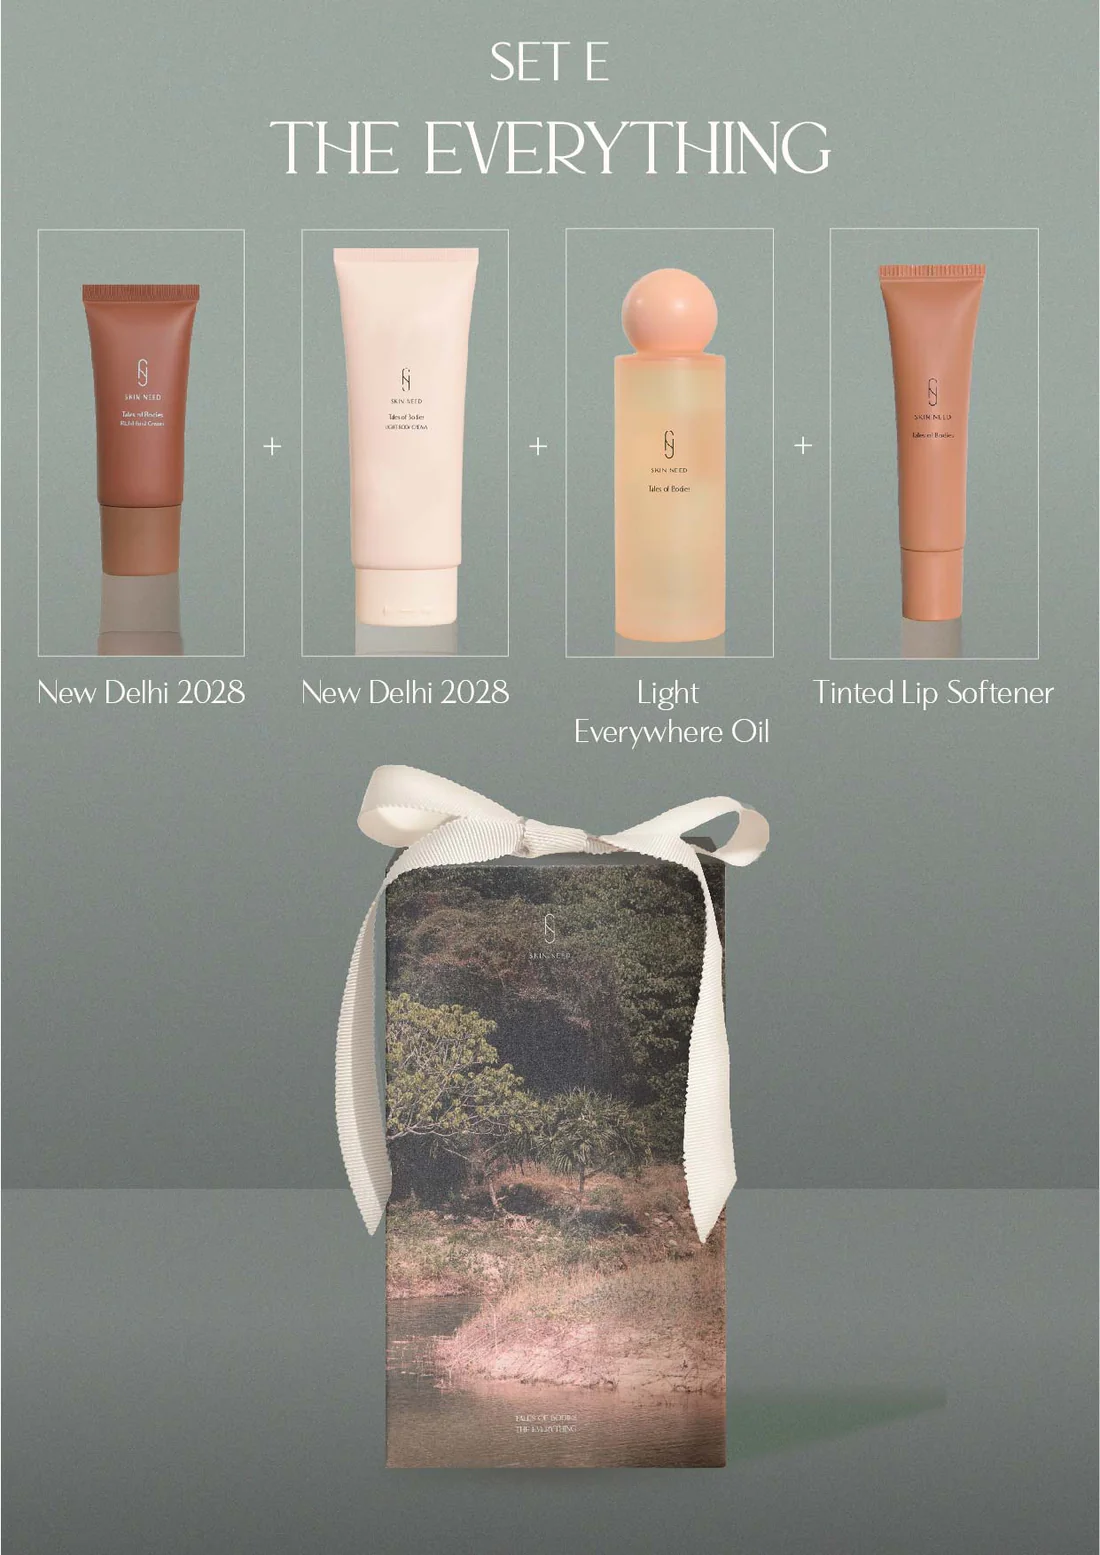 The Everything Body Pampering Set